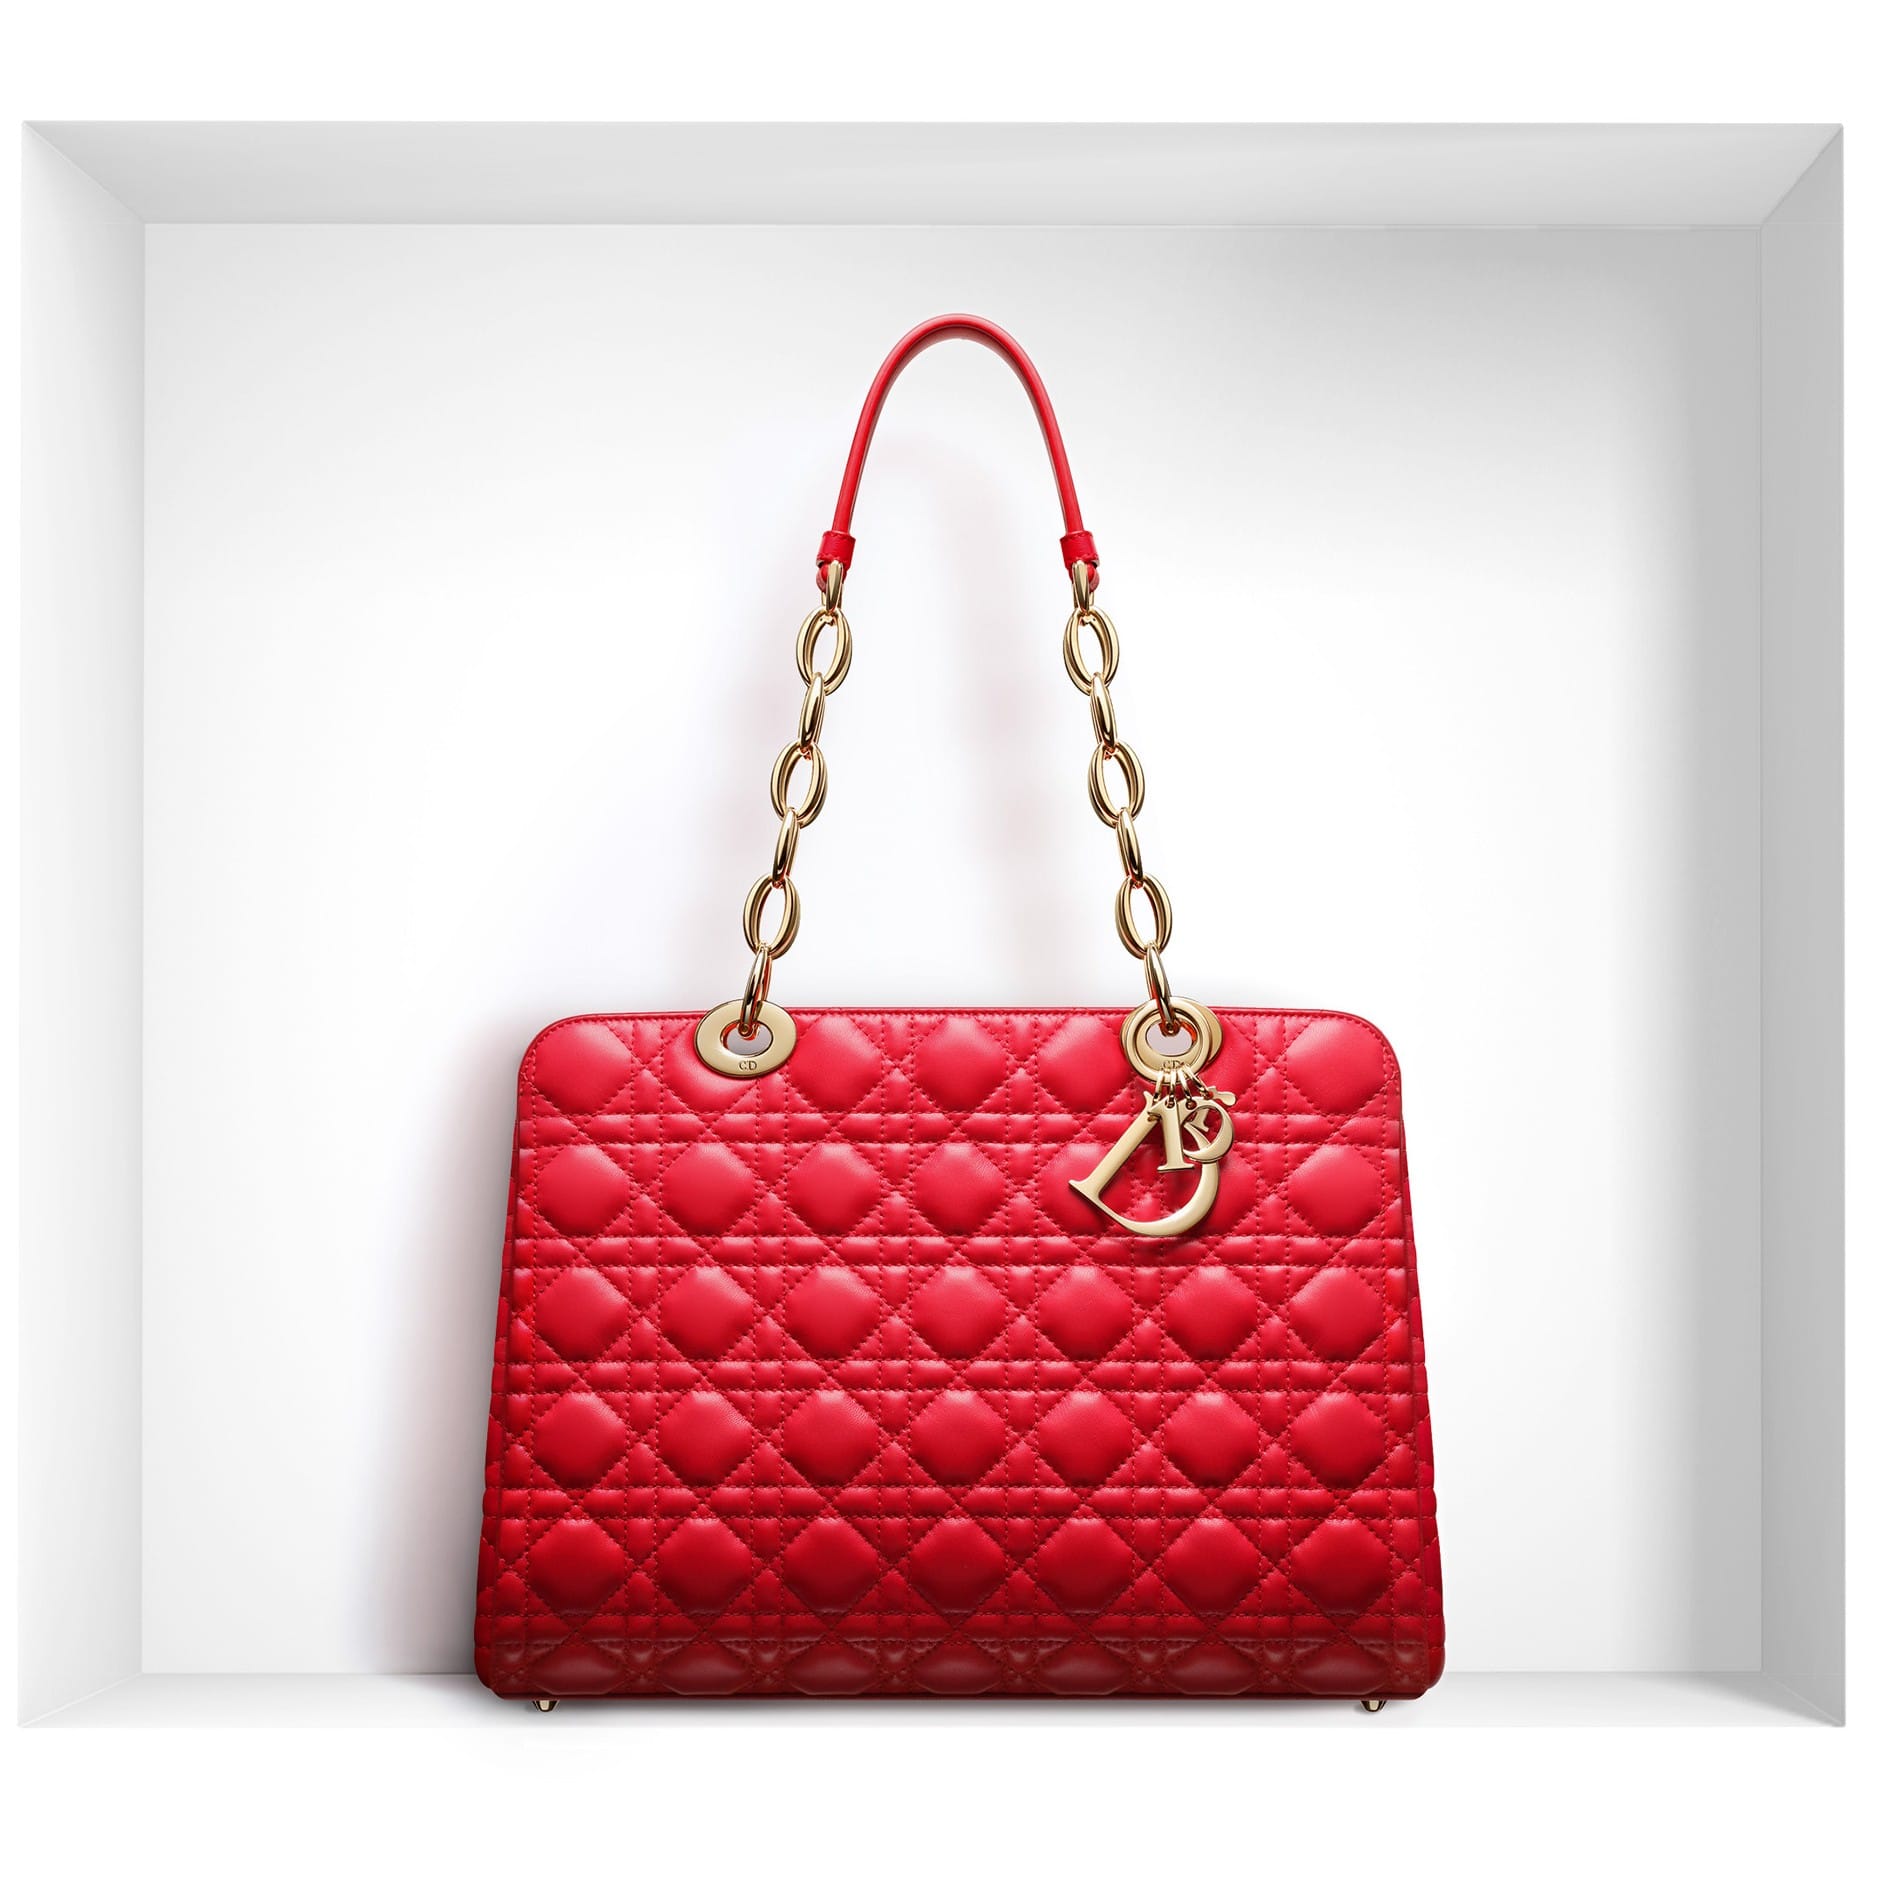 Dior's Lunar New Year Bags Collection - Spotted Fashion